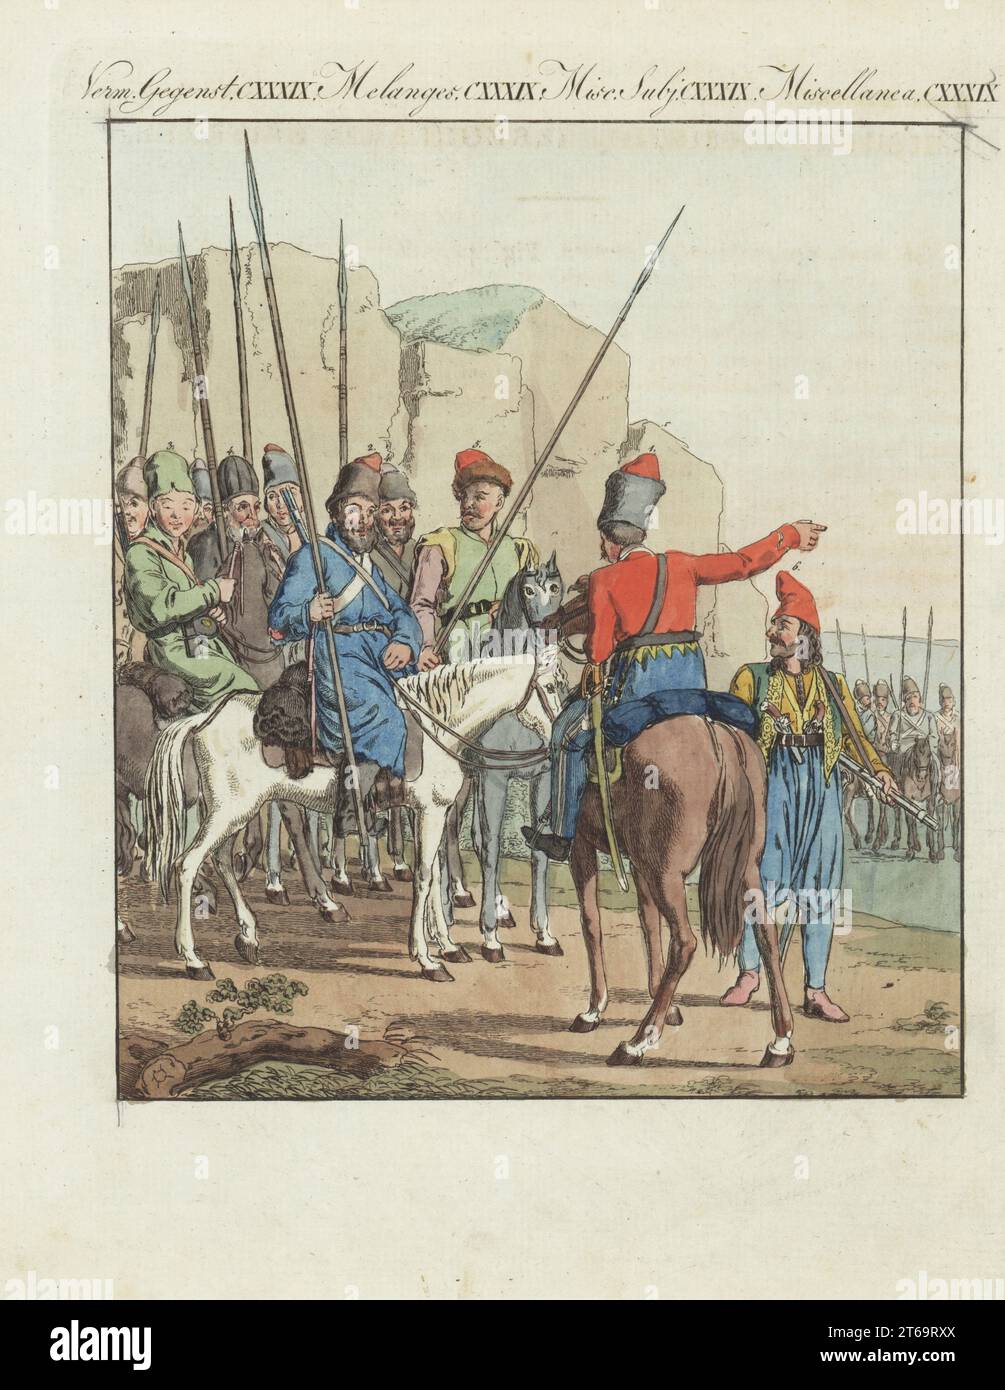 Russian irregular light horse. Officer 1 and cavalryman of the Don Cossacks, Kalmyk 3, Ural Cossack 4, Black Sea Cossack lancers 5, and Albanian infantryman with musket and pistols 6. Handcoloured copperplate engraving from Carl Bertuch's Bilderbuch fur Kinder (Picture Book for Children), Weimar, 1810. A 12-volume encyclopedia for children illustrated with almost 1,200 engraved plates on natural history, science, costume, mythology, etc., published from 1790-1830. Stock Photo